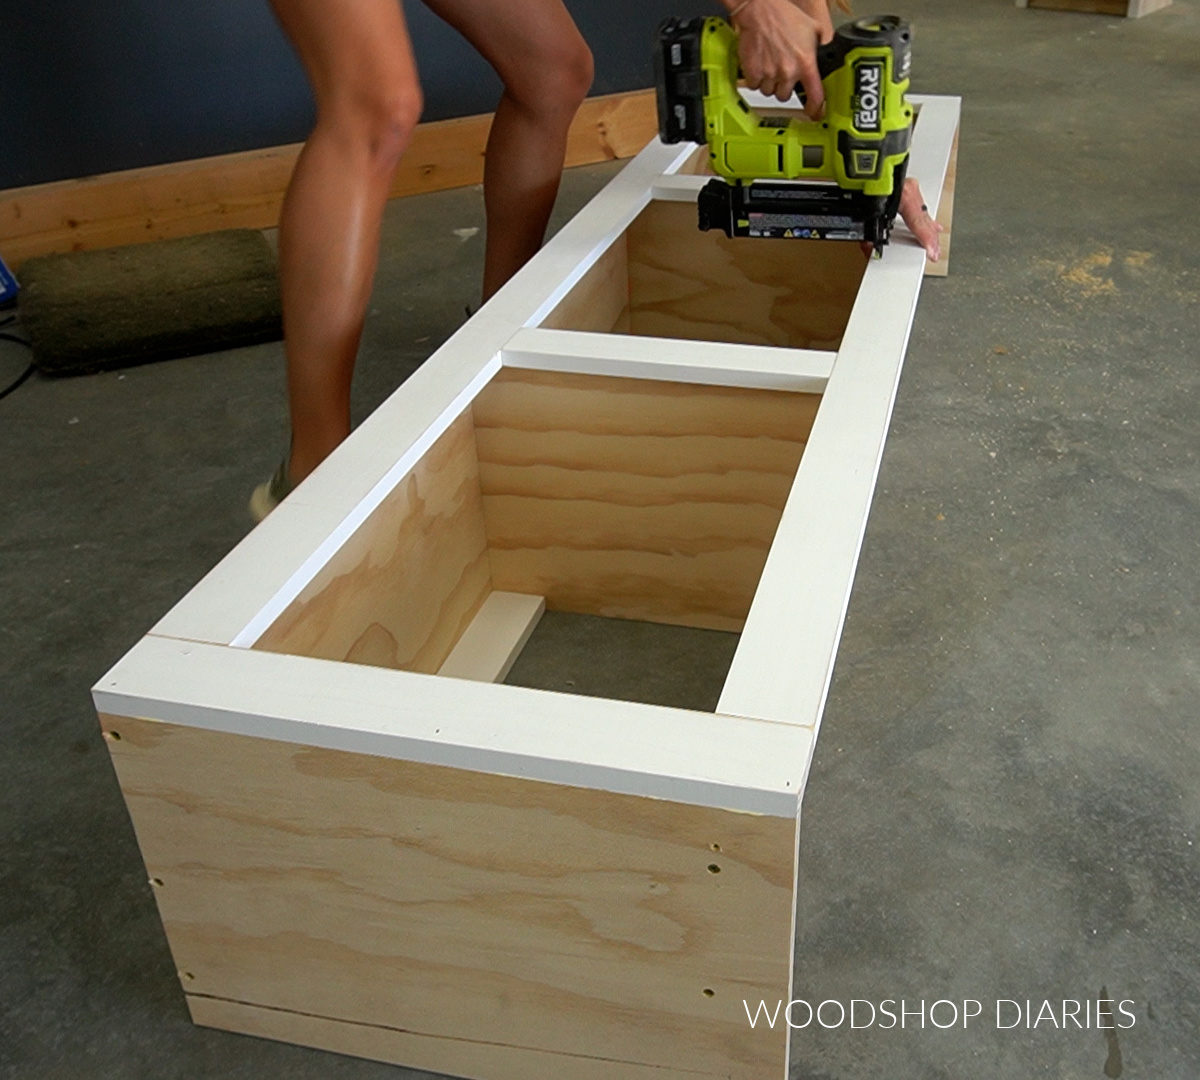 Shara Woodshop Diaries nailing face frame on front of cabinet on workshop floor